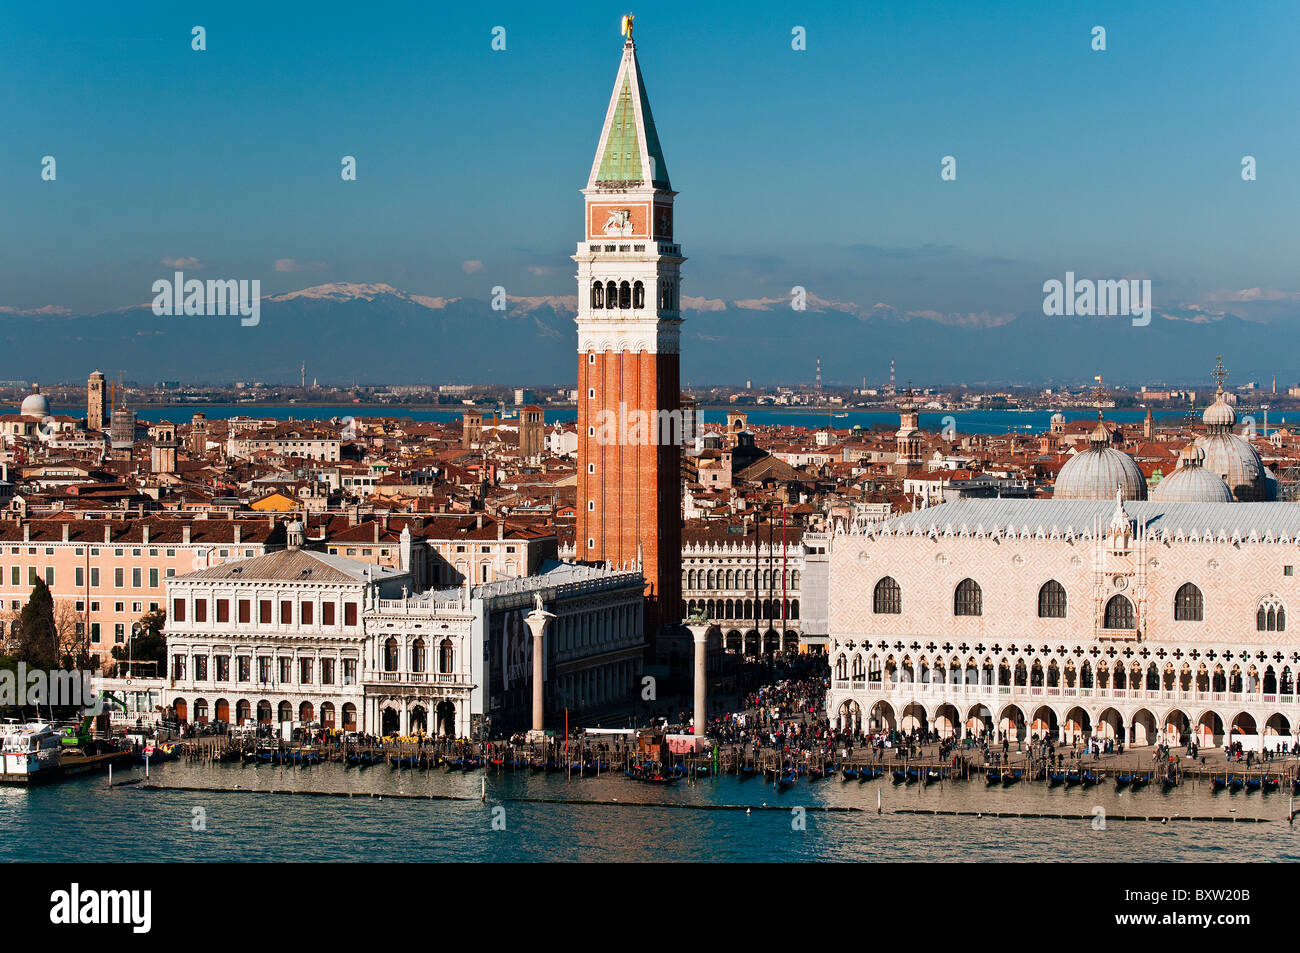 Winter view of the St. Mark's Belfry and Doge's Palace with the snowy Alps in the background, Venice, Italy Stock Photo